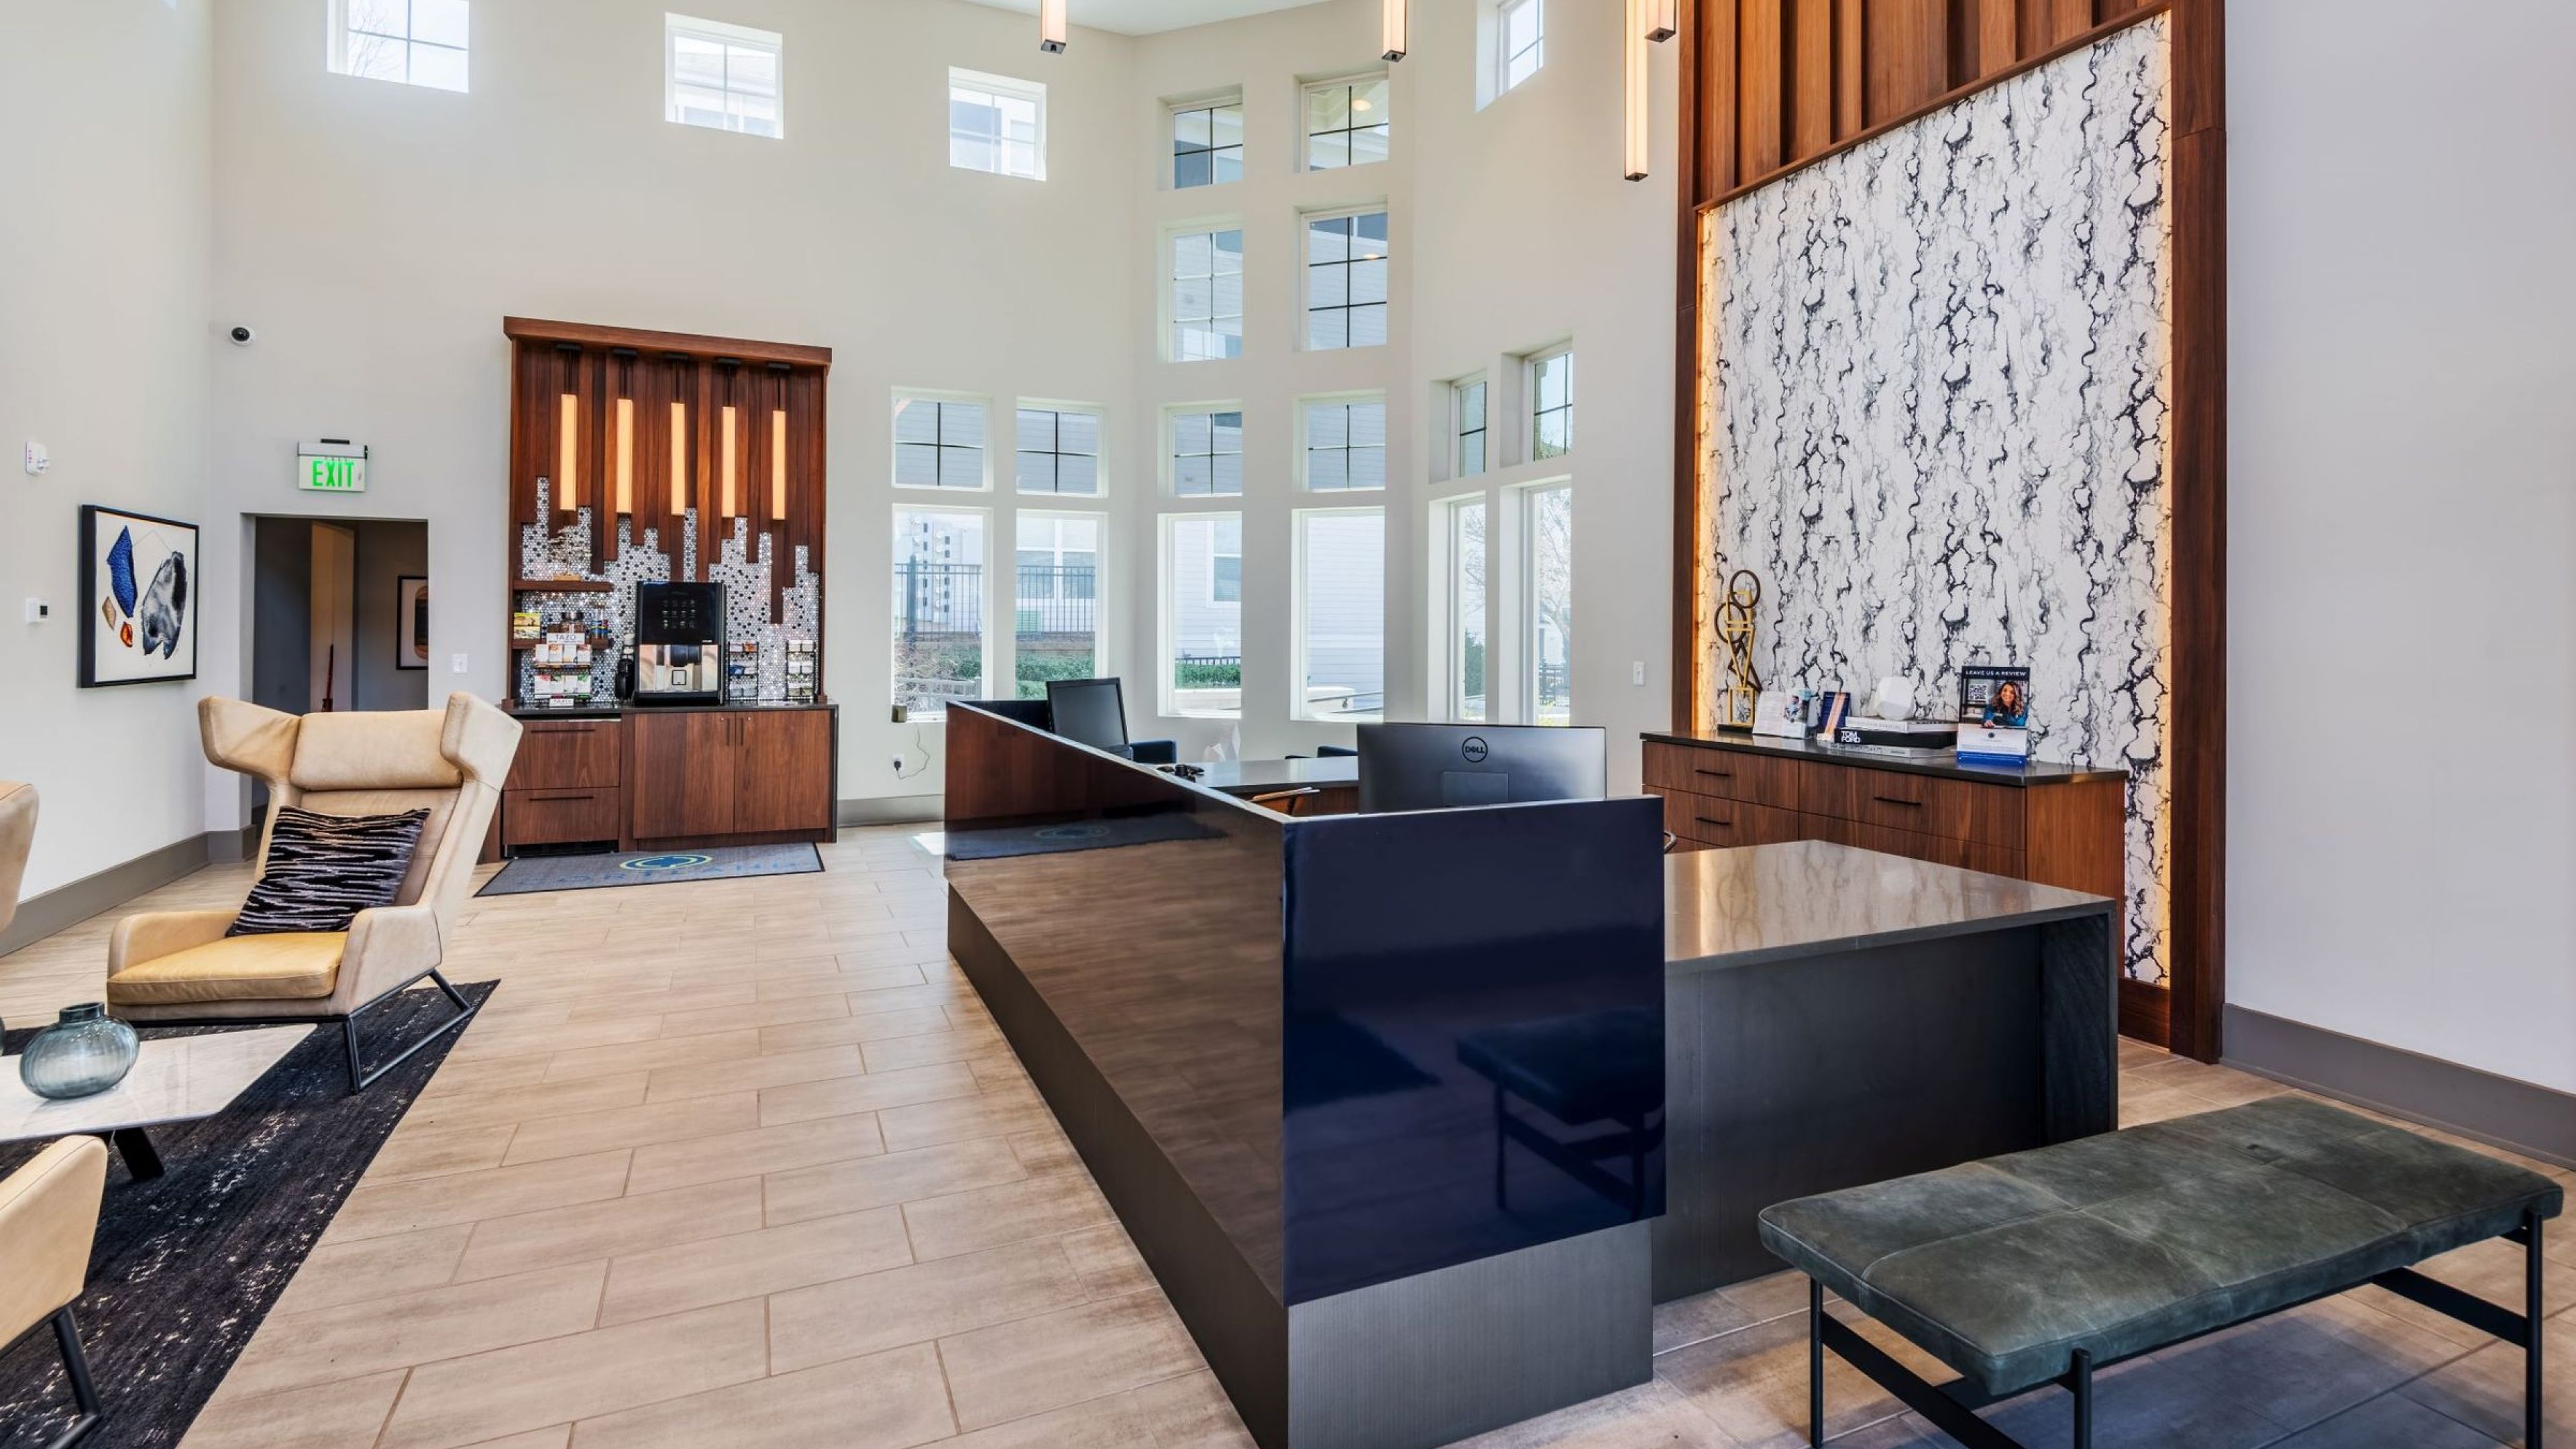 Hawthorne Davis Park resident clubhouse front lobby with a front desk, snack and coffee area, and seating